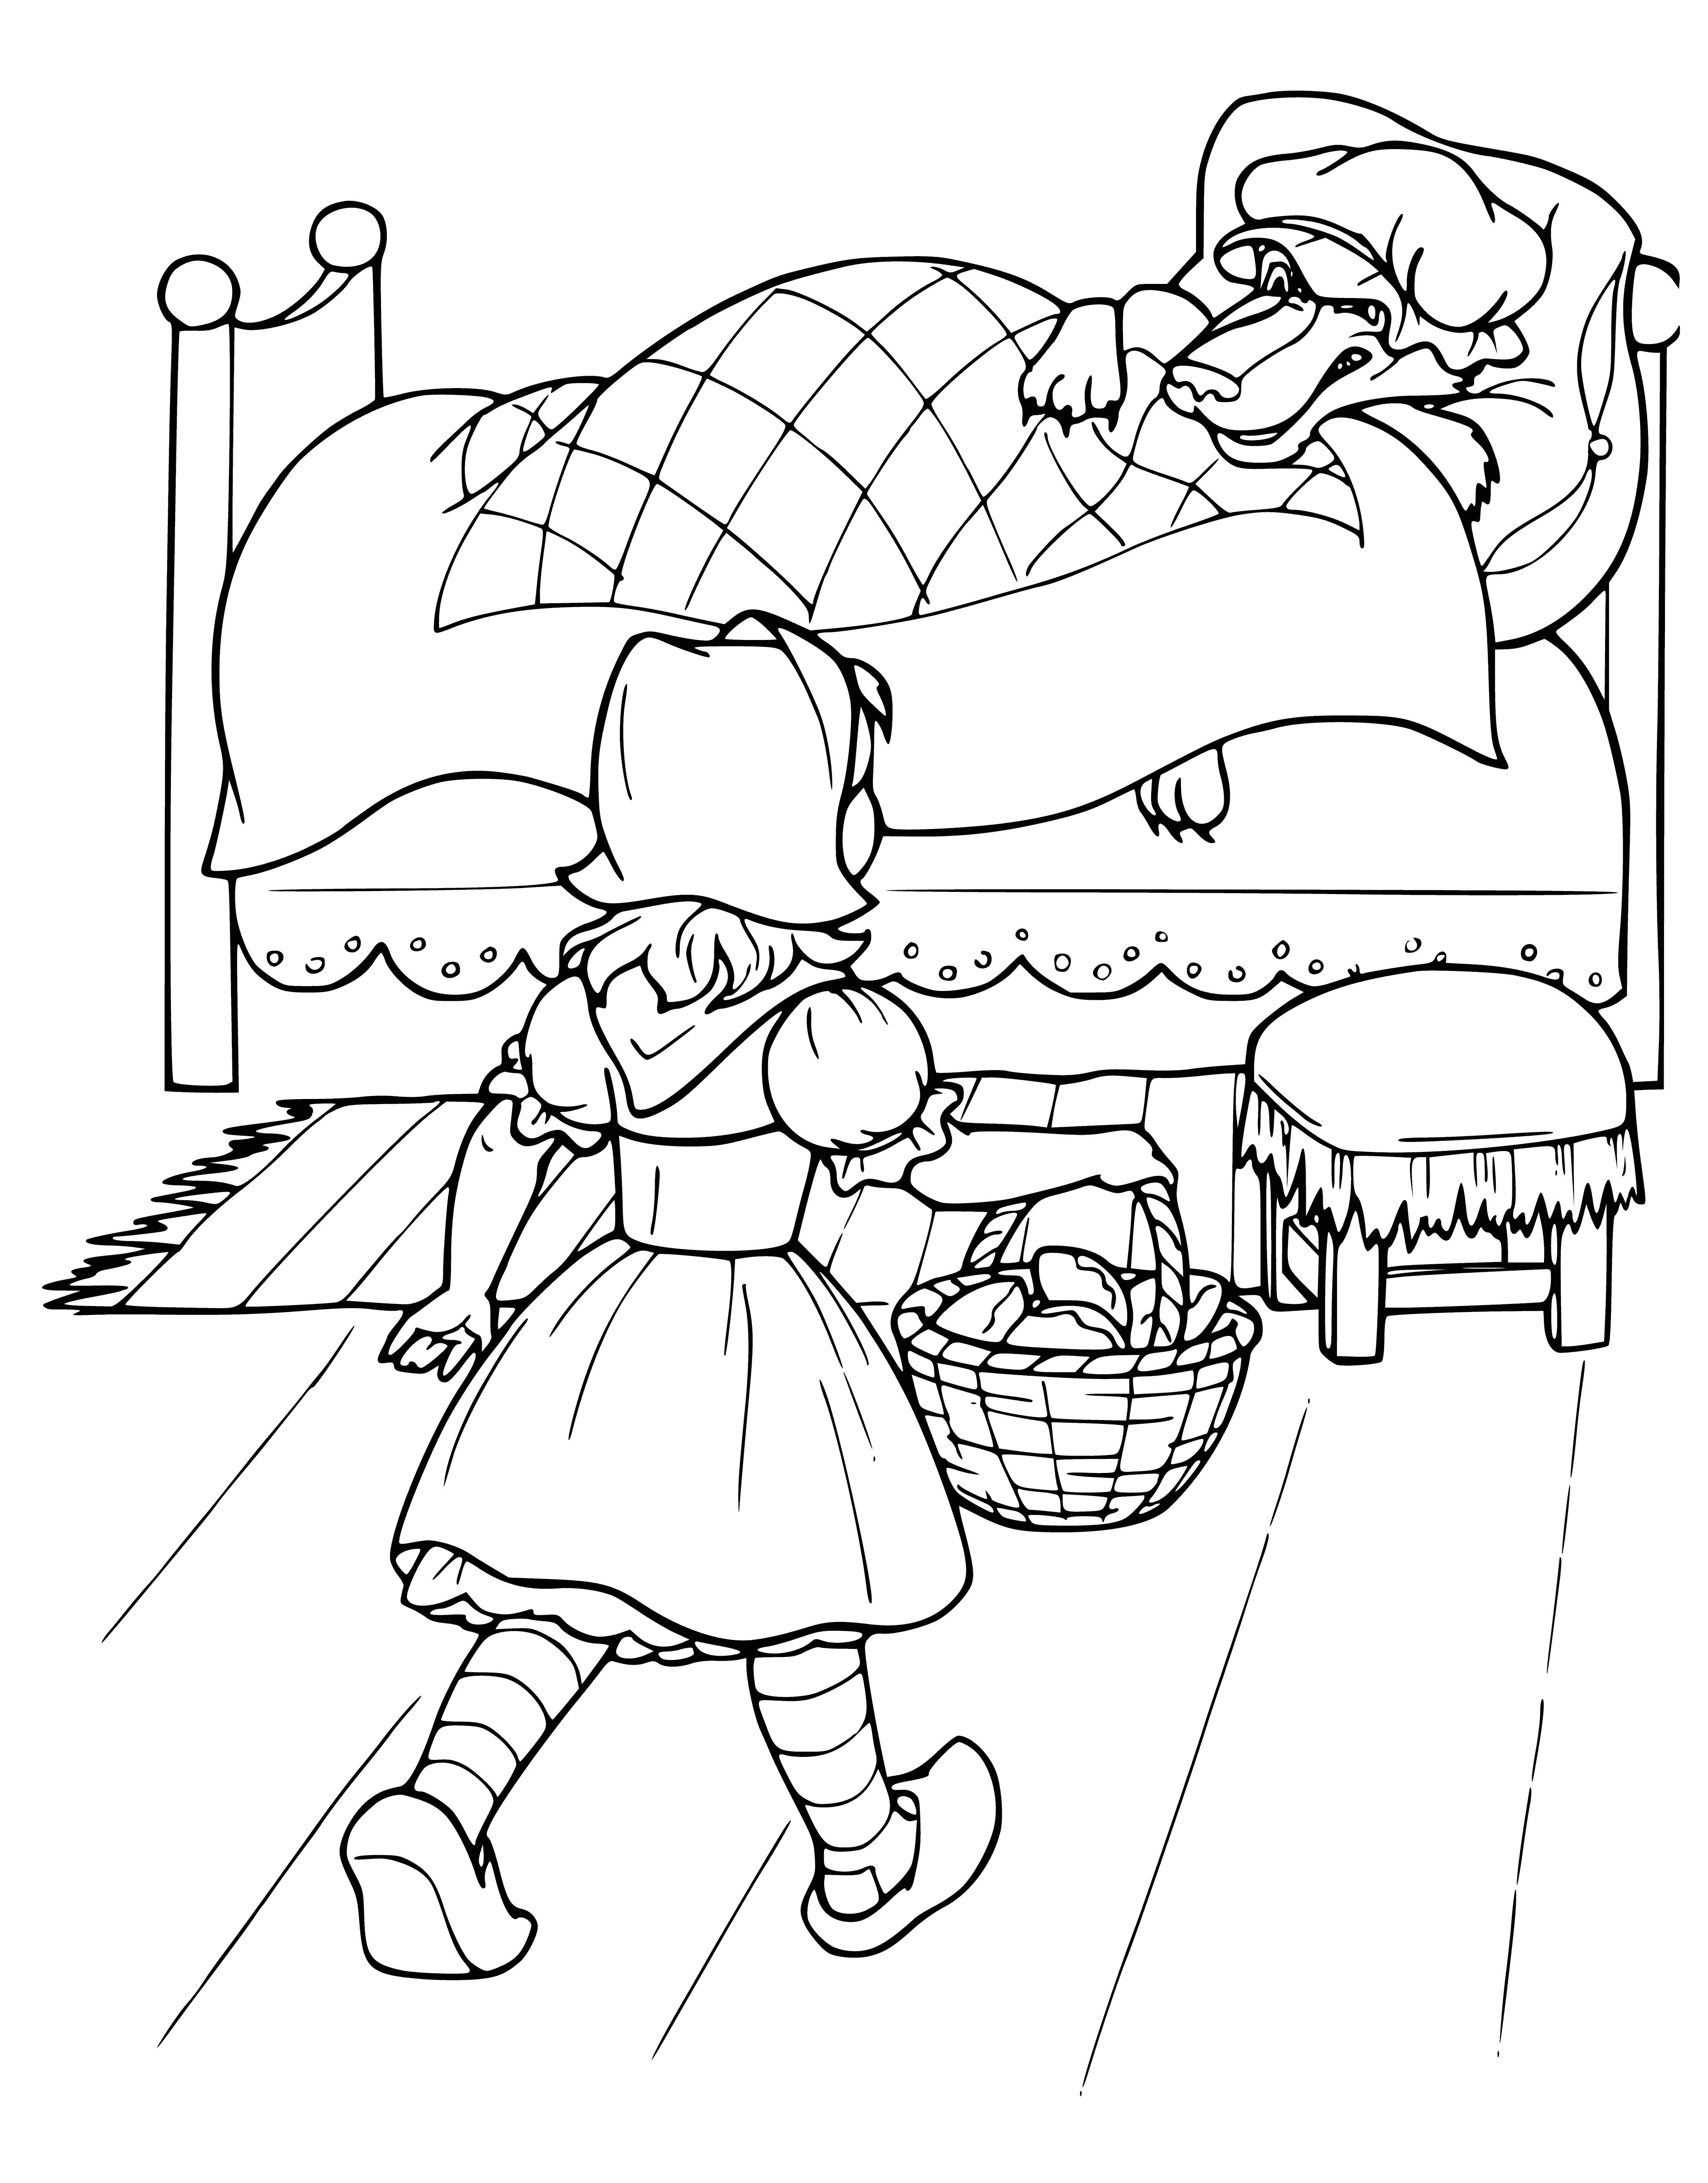 coloring page: Girl in red hooded cape walks through forest w/ basket, followed by wolf.